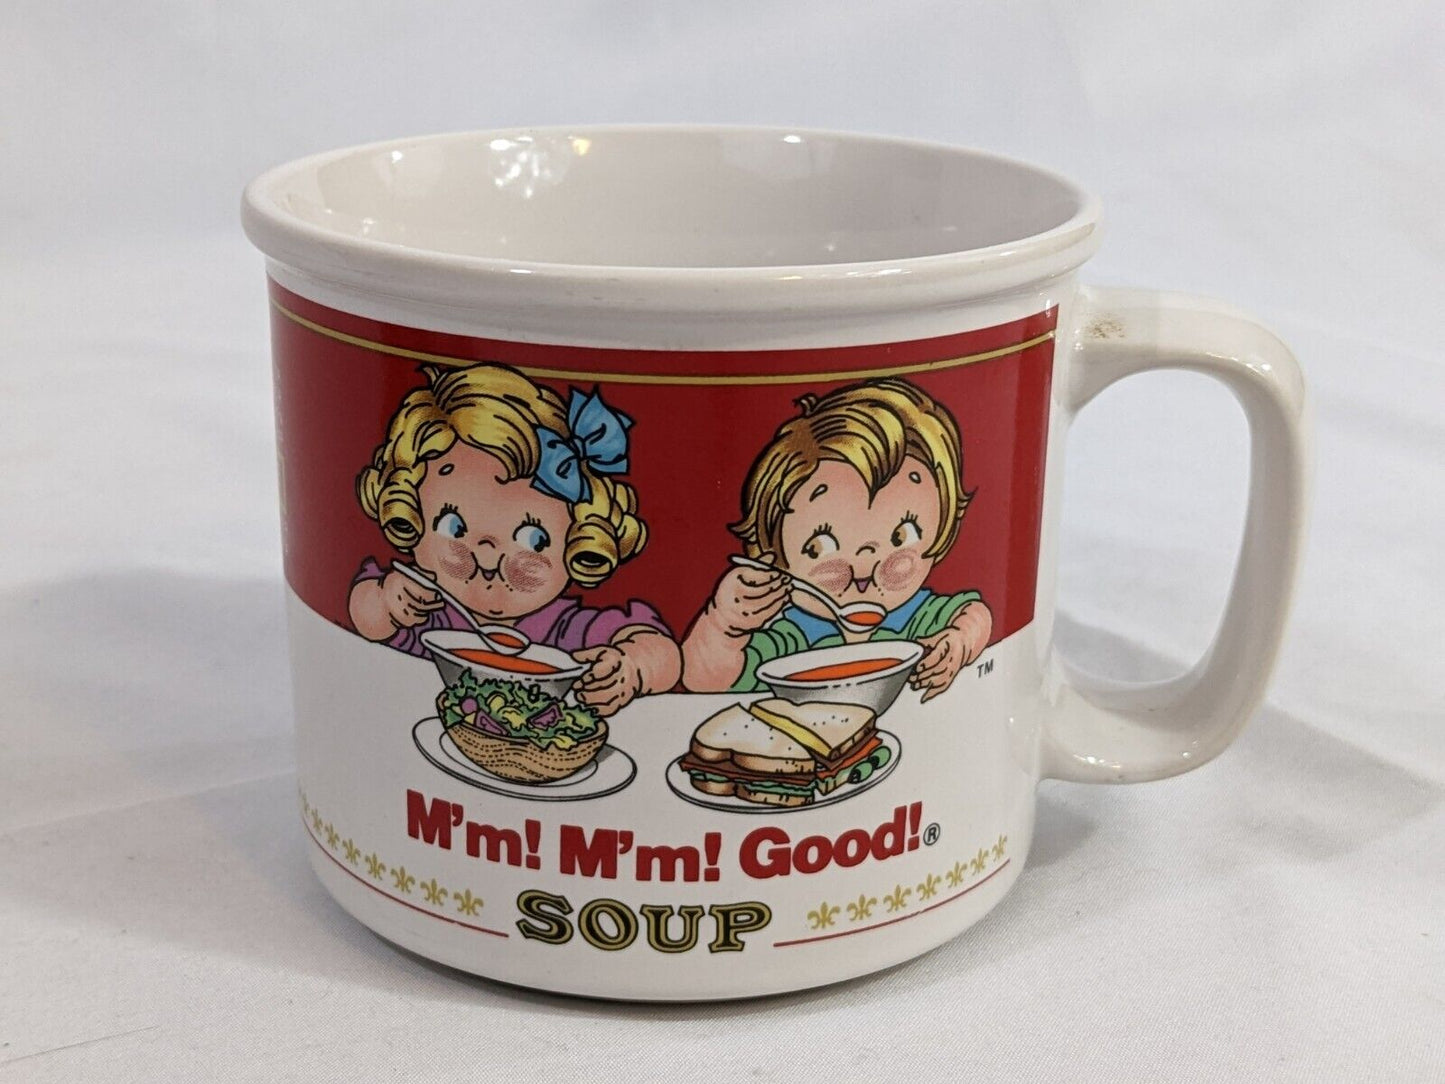 Campbell's Soup Ceramic Mug 1991 Microwavable 14 fl oz by Westwood